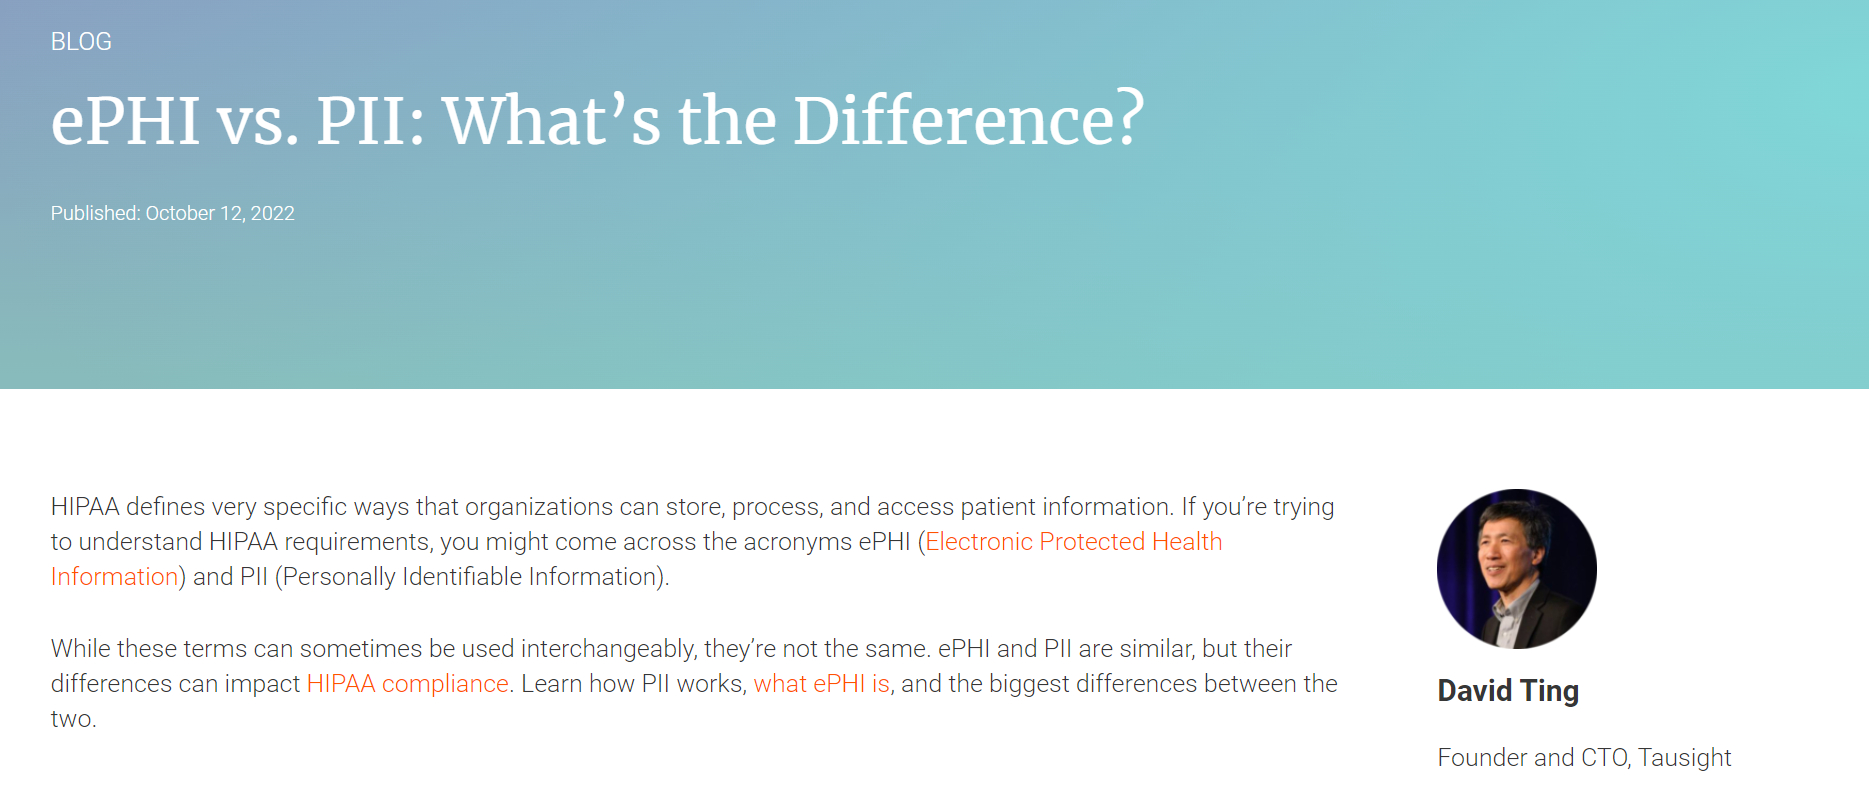 ePHI vs. PII: What’s the Difference?